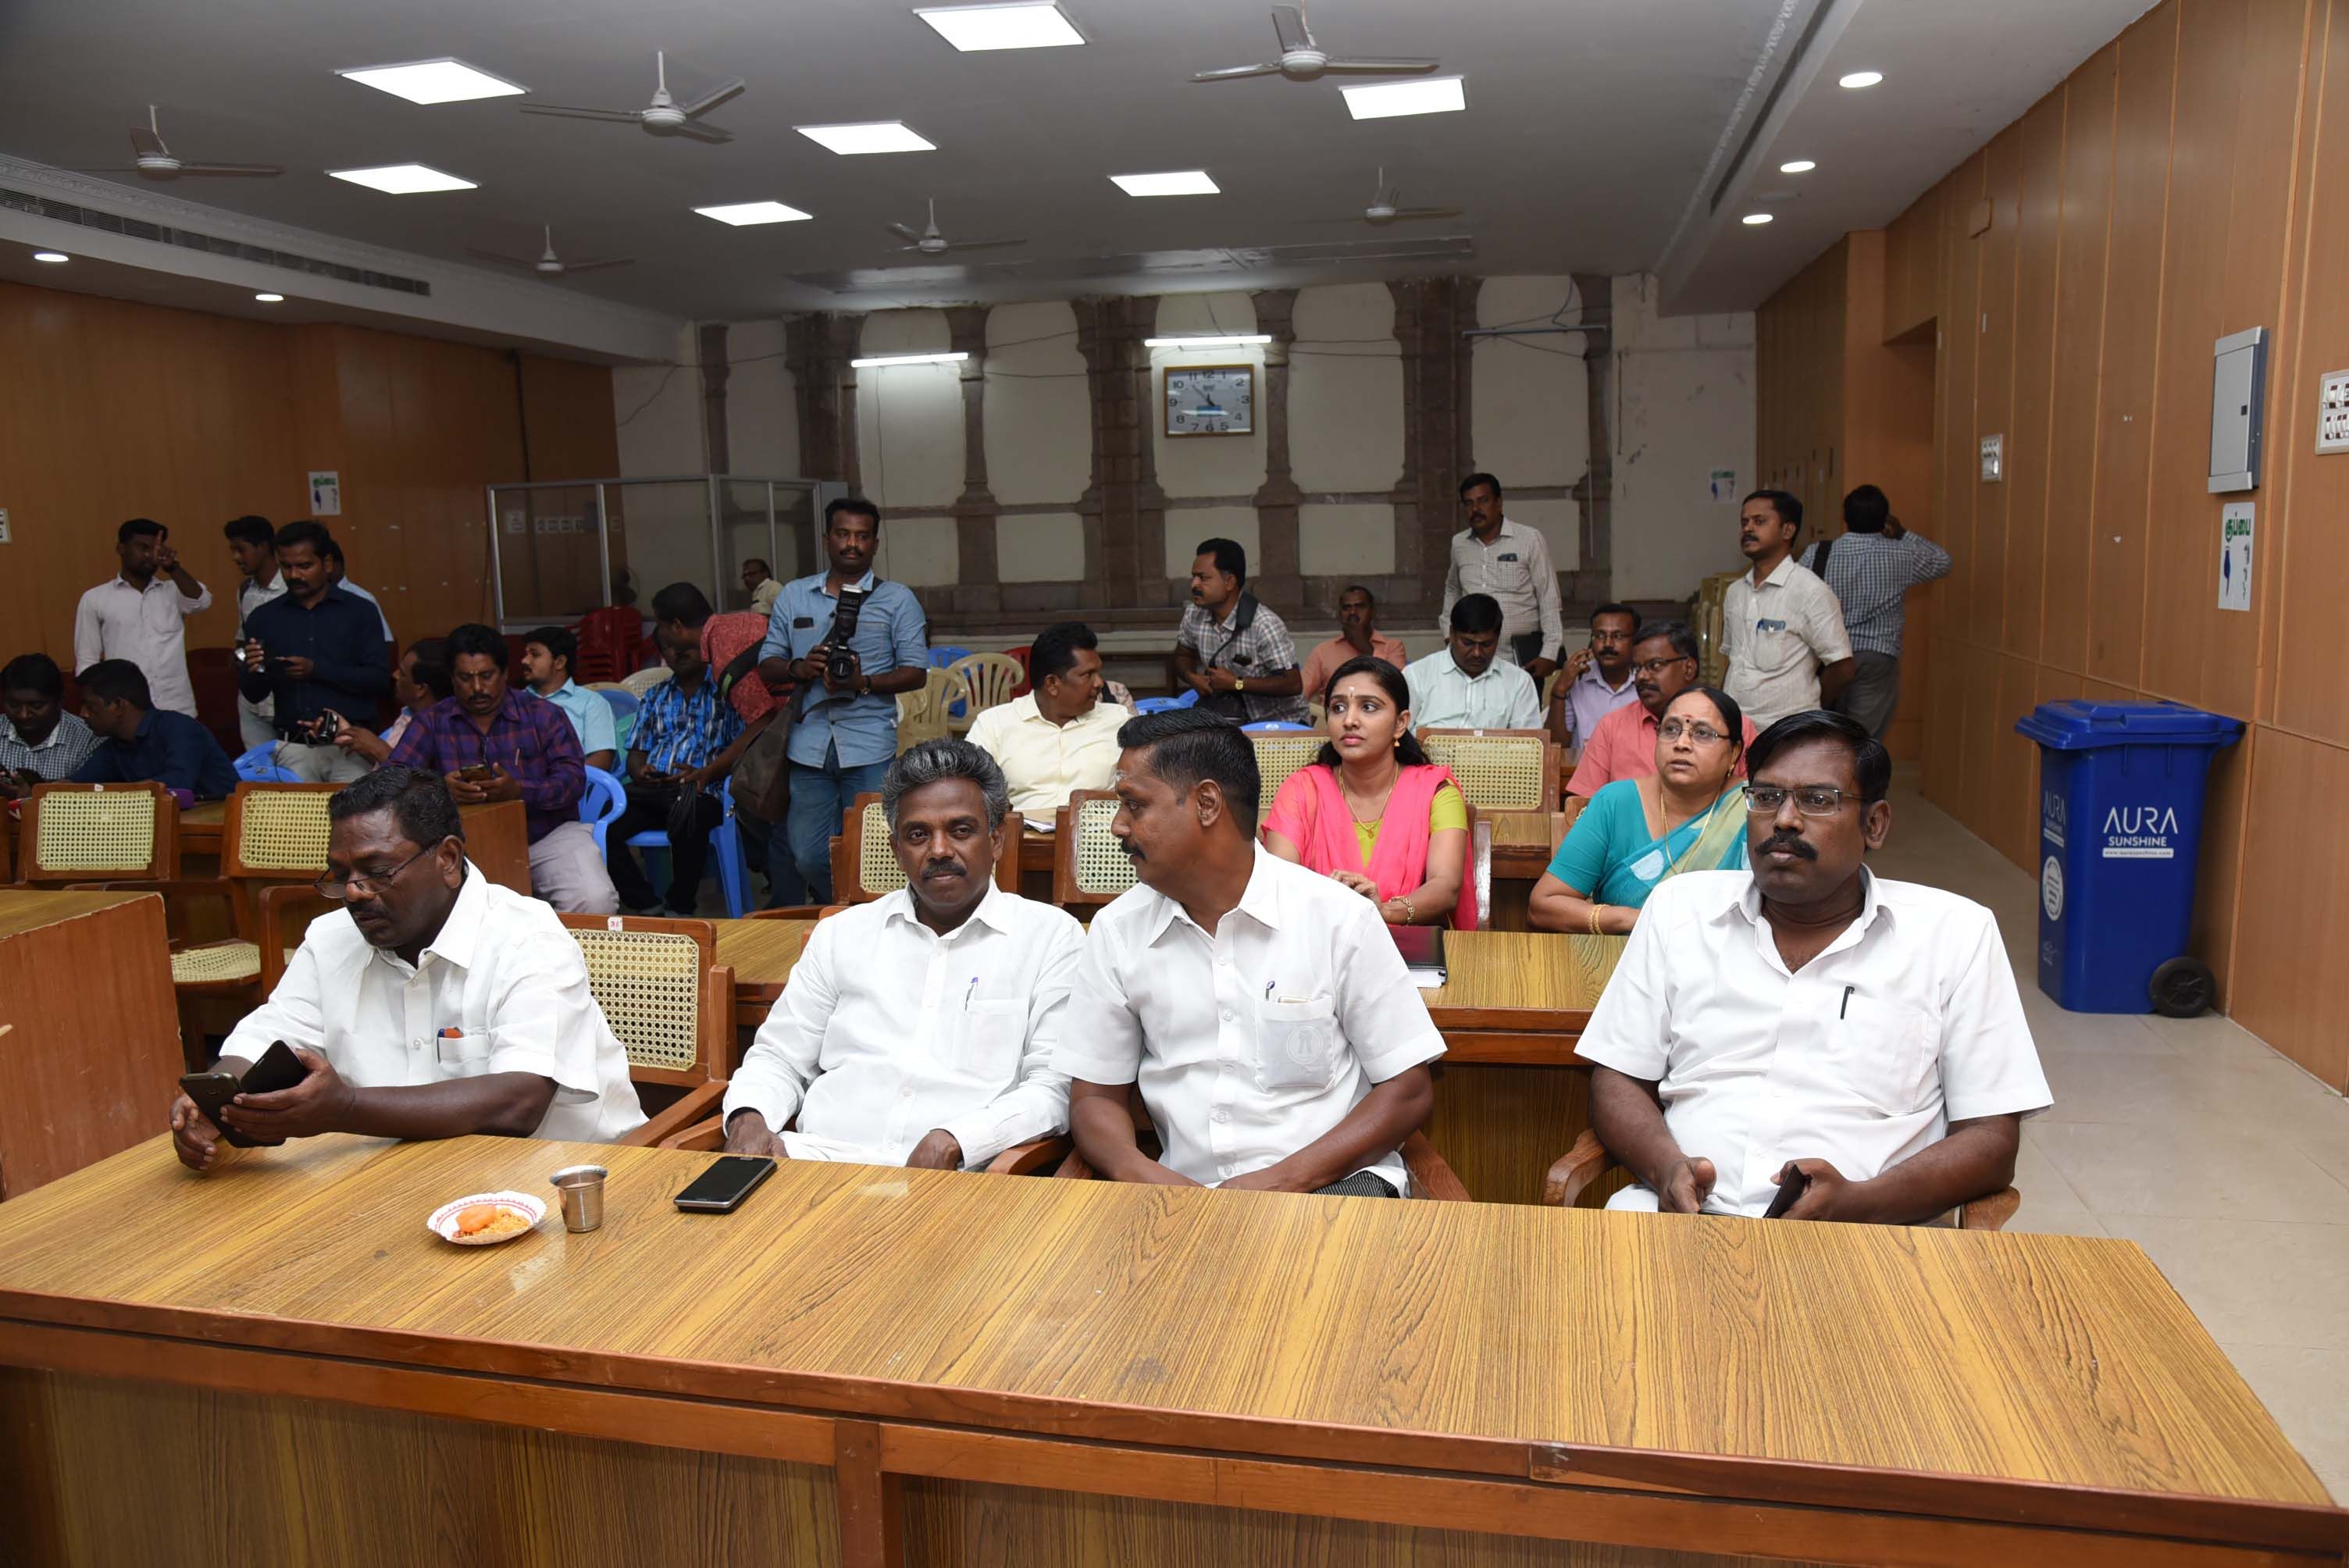 The first randomization of EVM-VVPAT machines in presence of Madurai District collector/Returning officer and political parties.